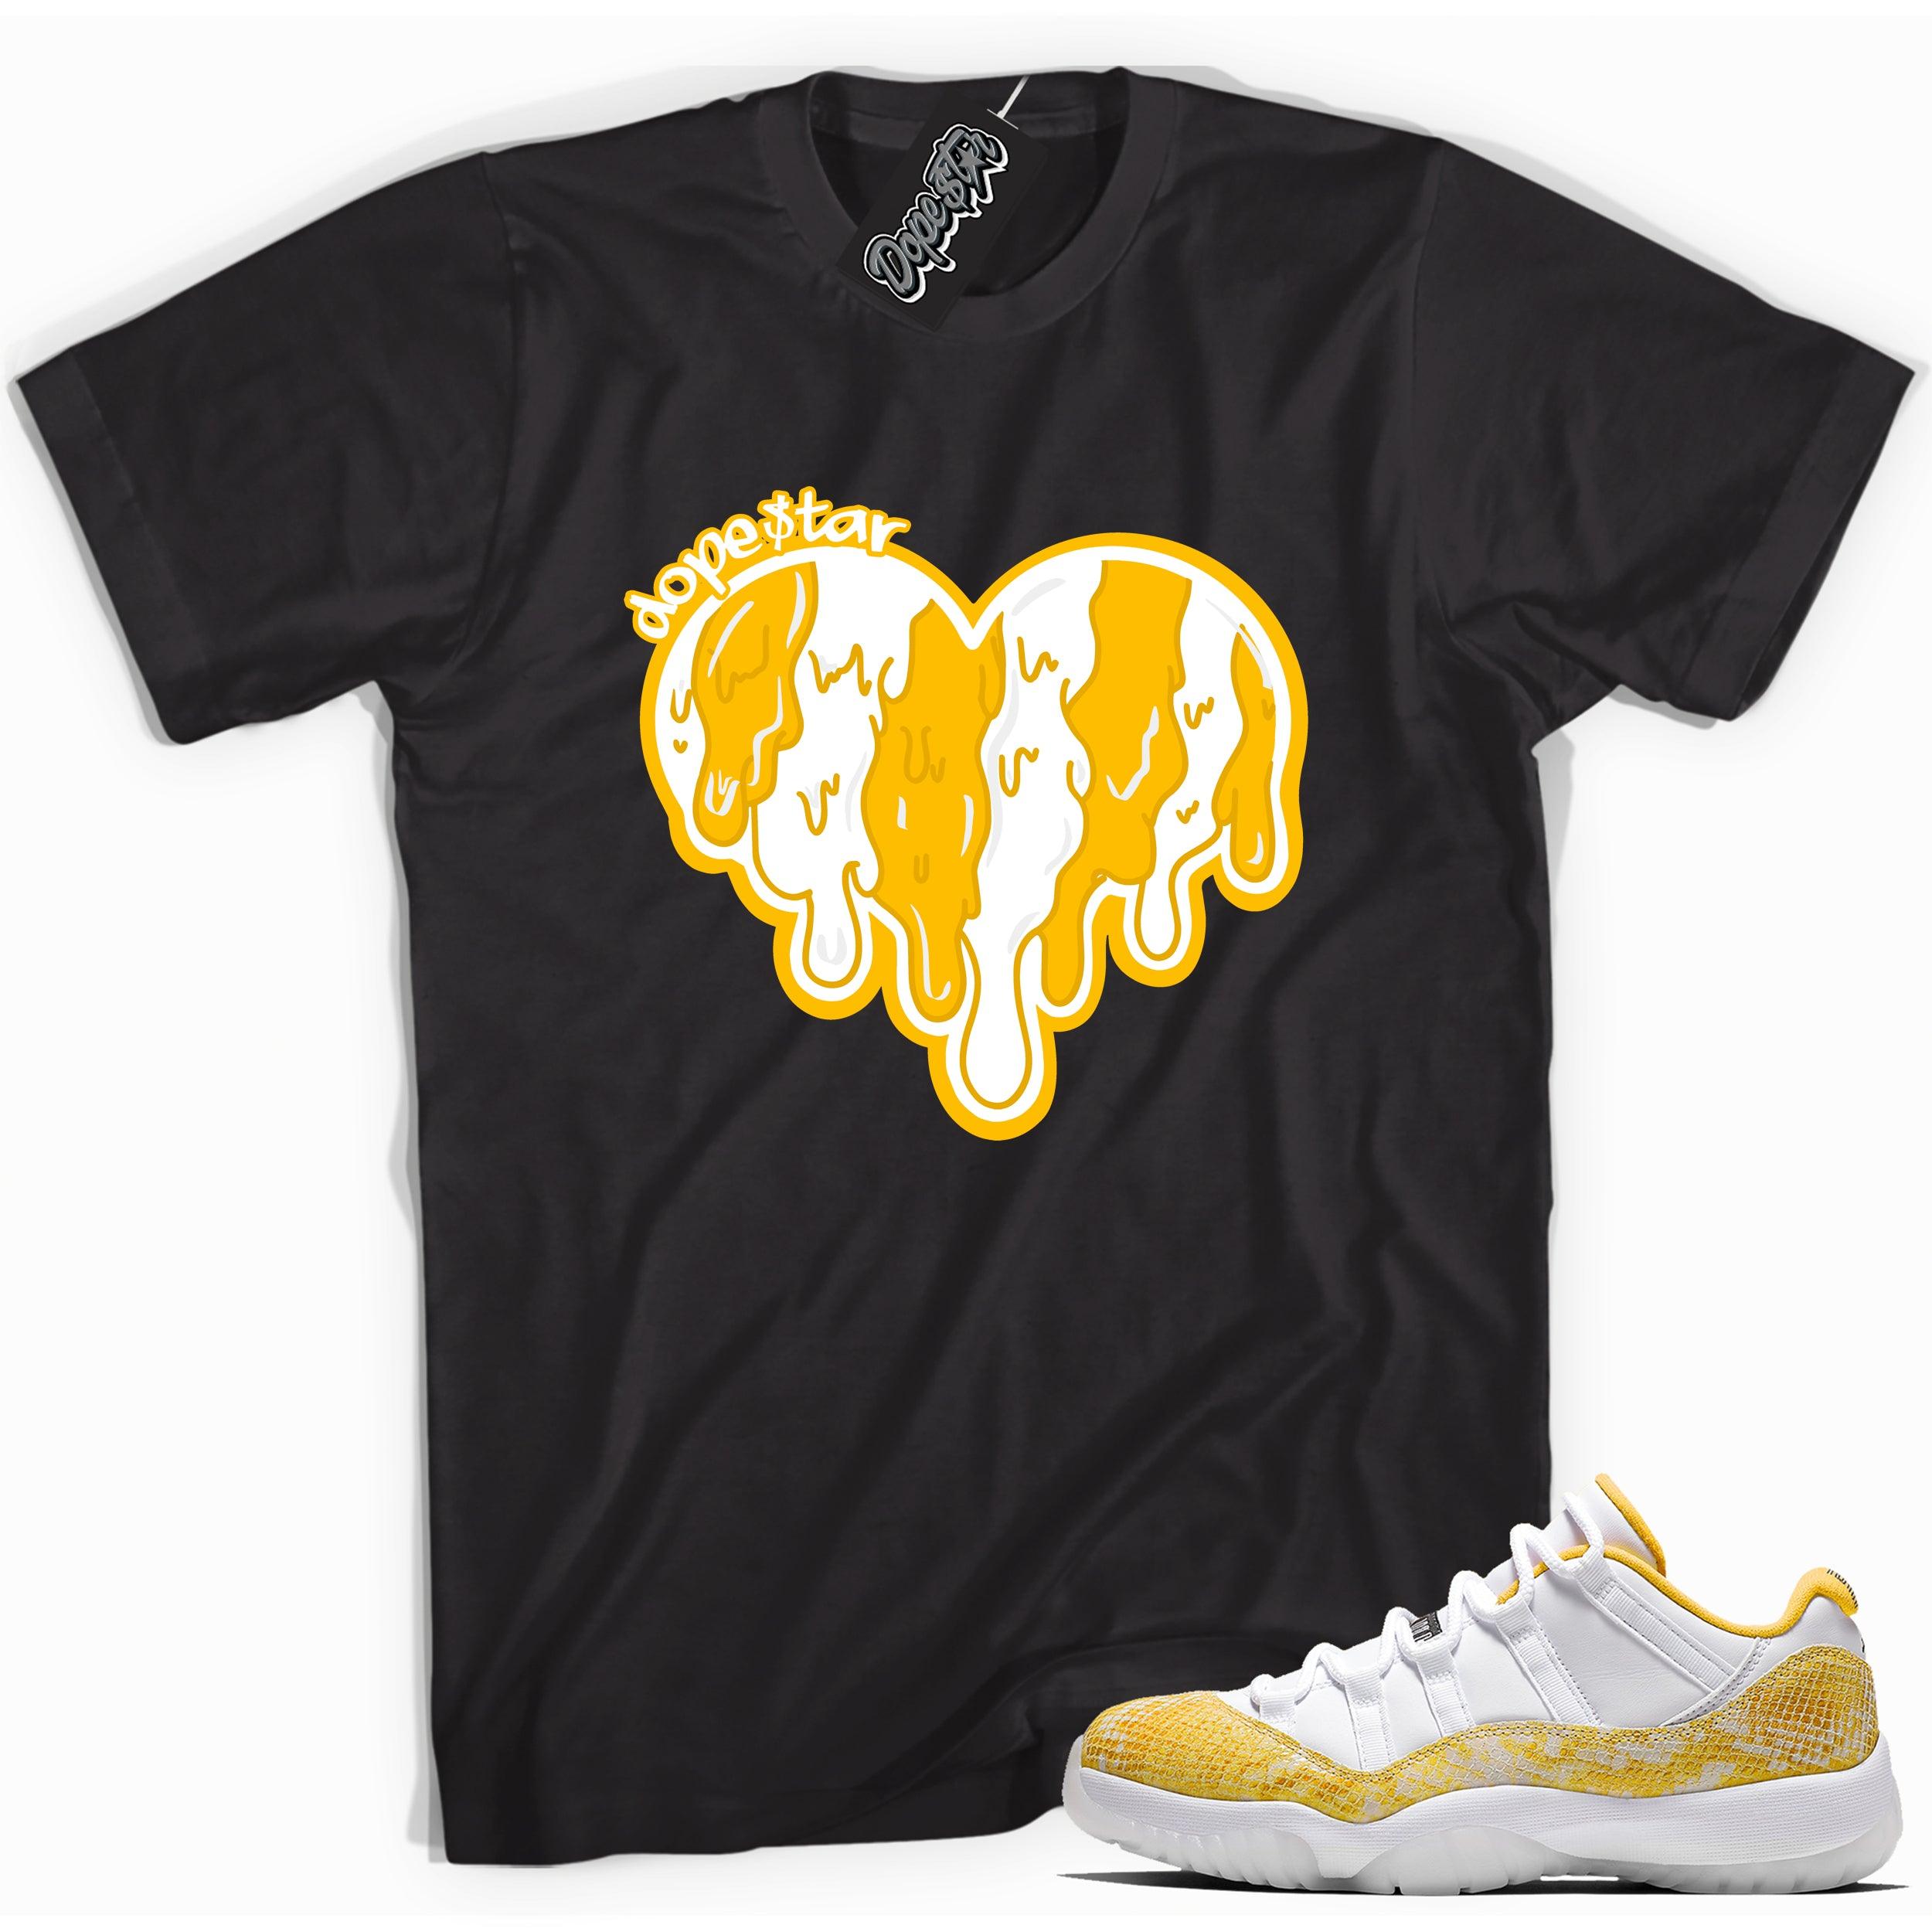 Cool black graphic tee with 'melting heart' print, that perfectly matches  Air Jordan 11 Low Yellow Snakeskin sneakers